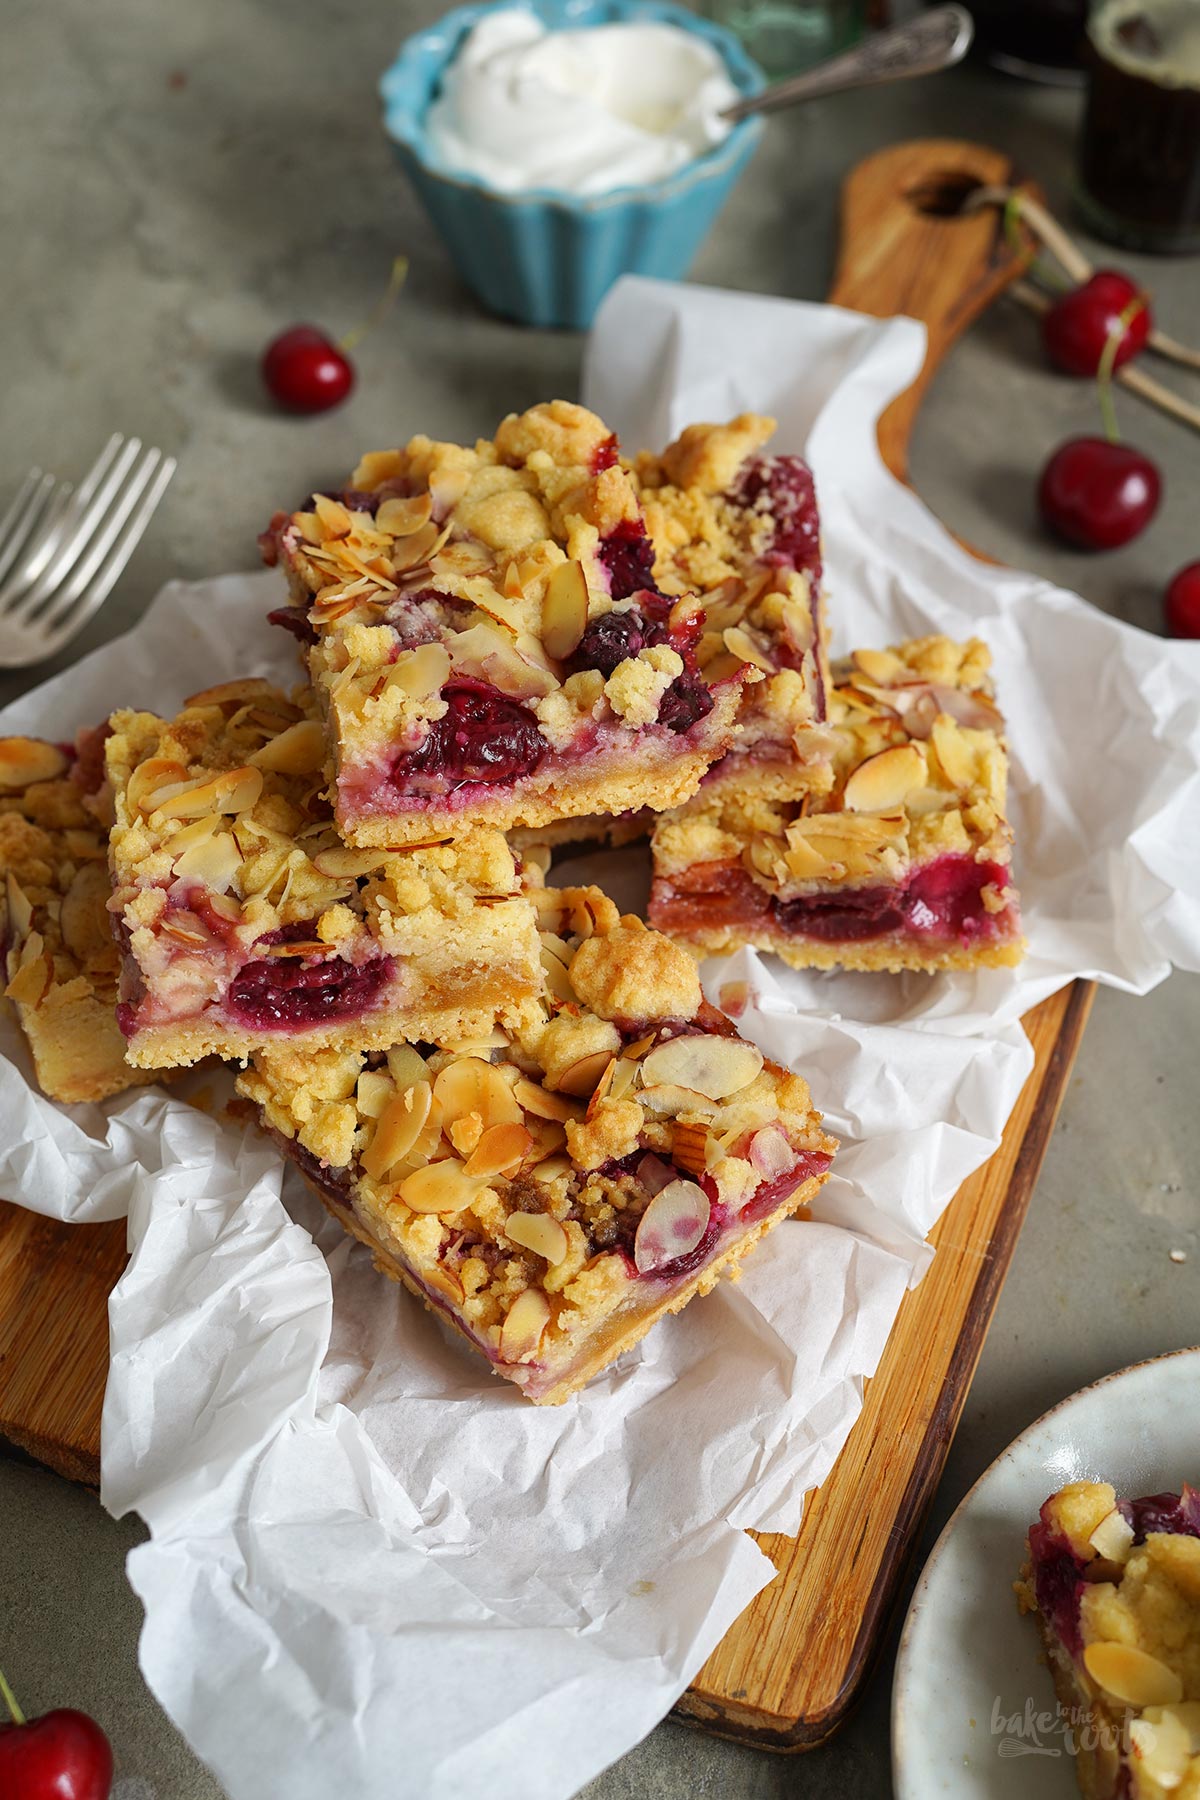 Cherry Marzipan Streusel Shortbread Bars | Bake to the roots